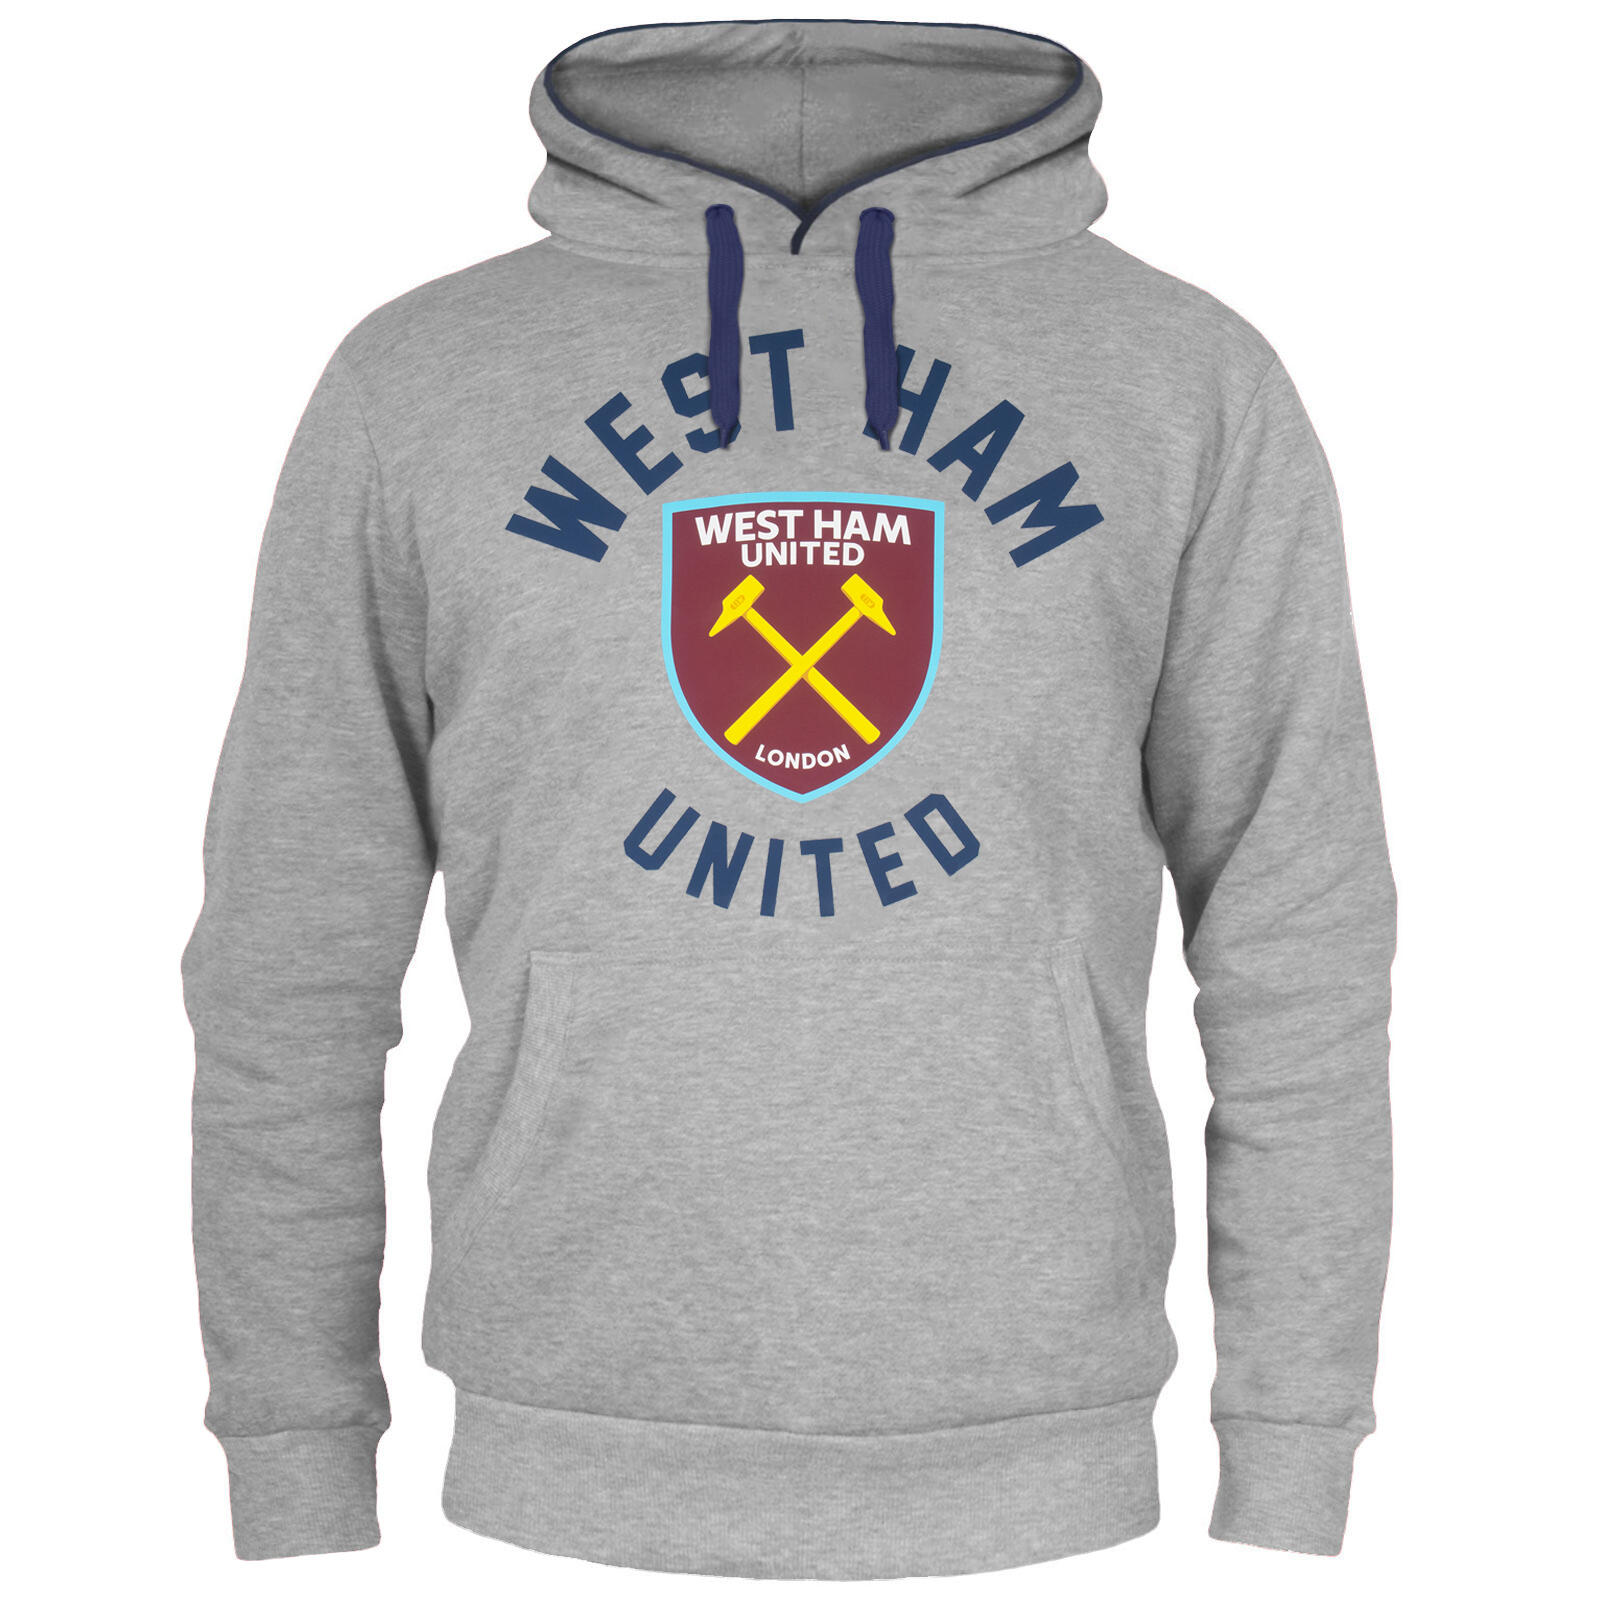 WEST HAM UNITED West Ham United Mens Hoody Fleece Graphic OFFICIAL Football Gift